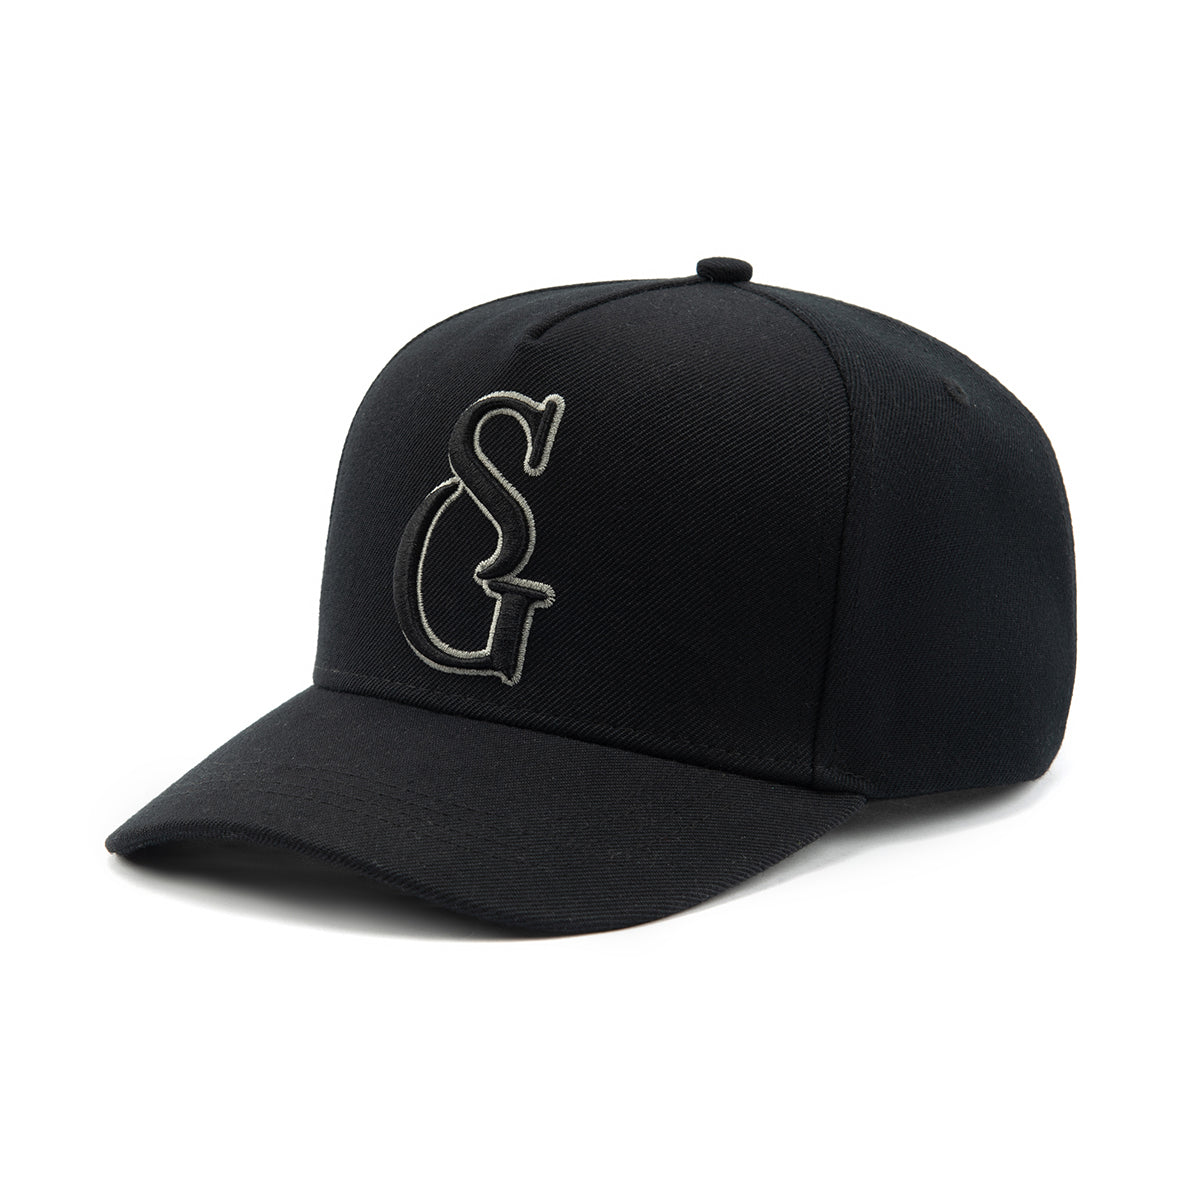 Black ‘SG’ Cap With Grey Outline